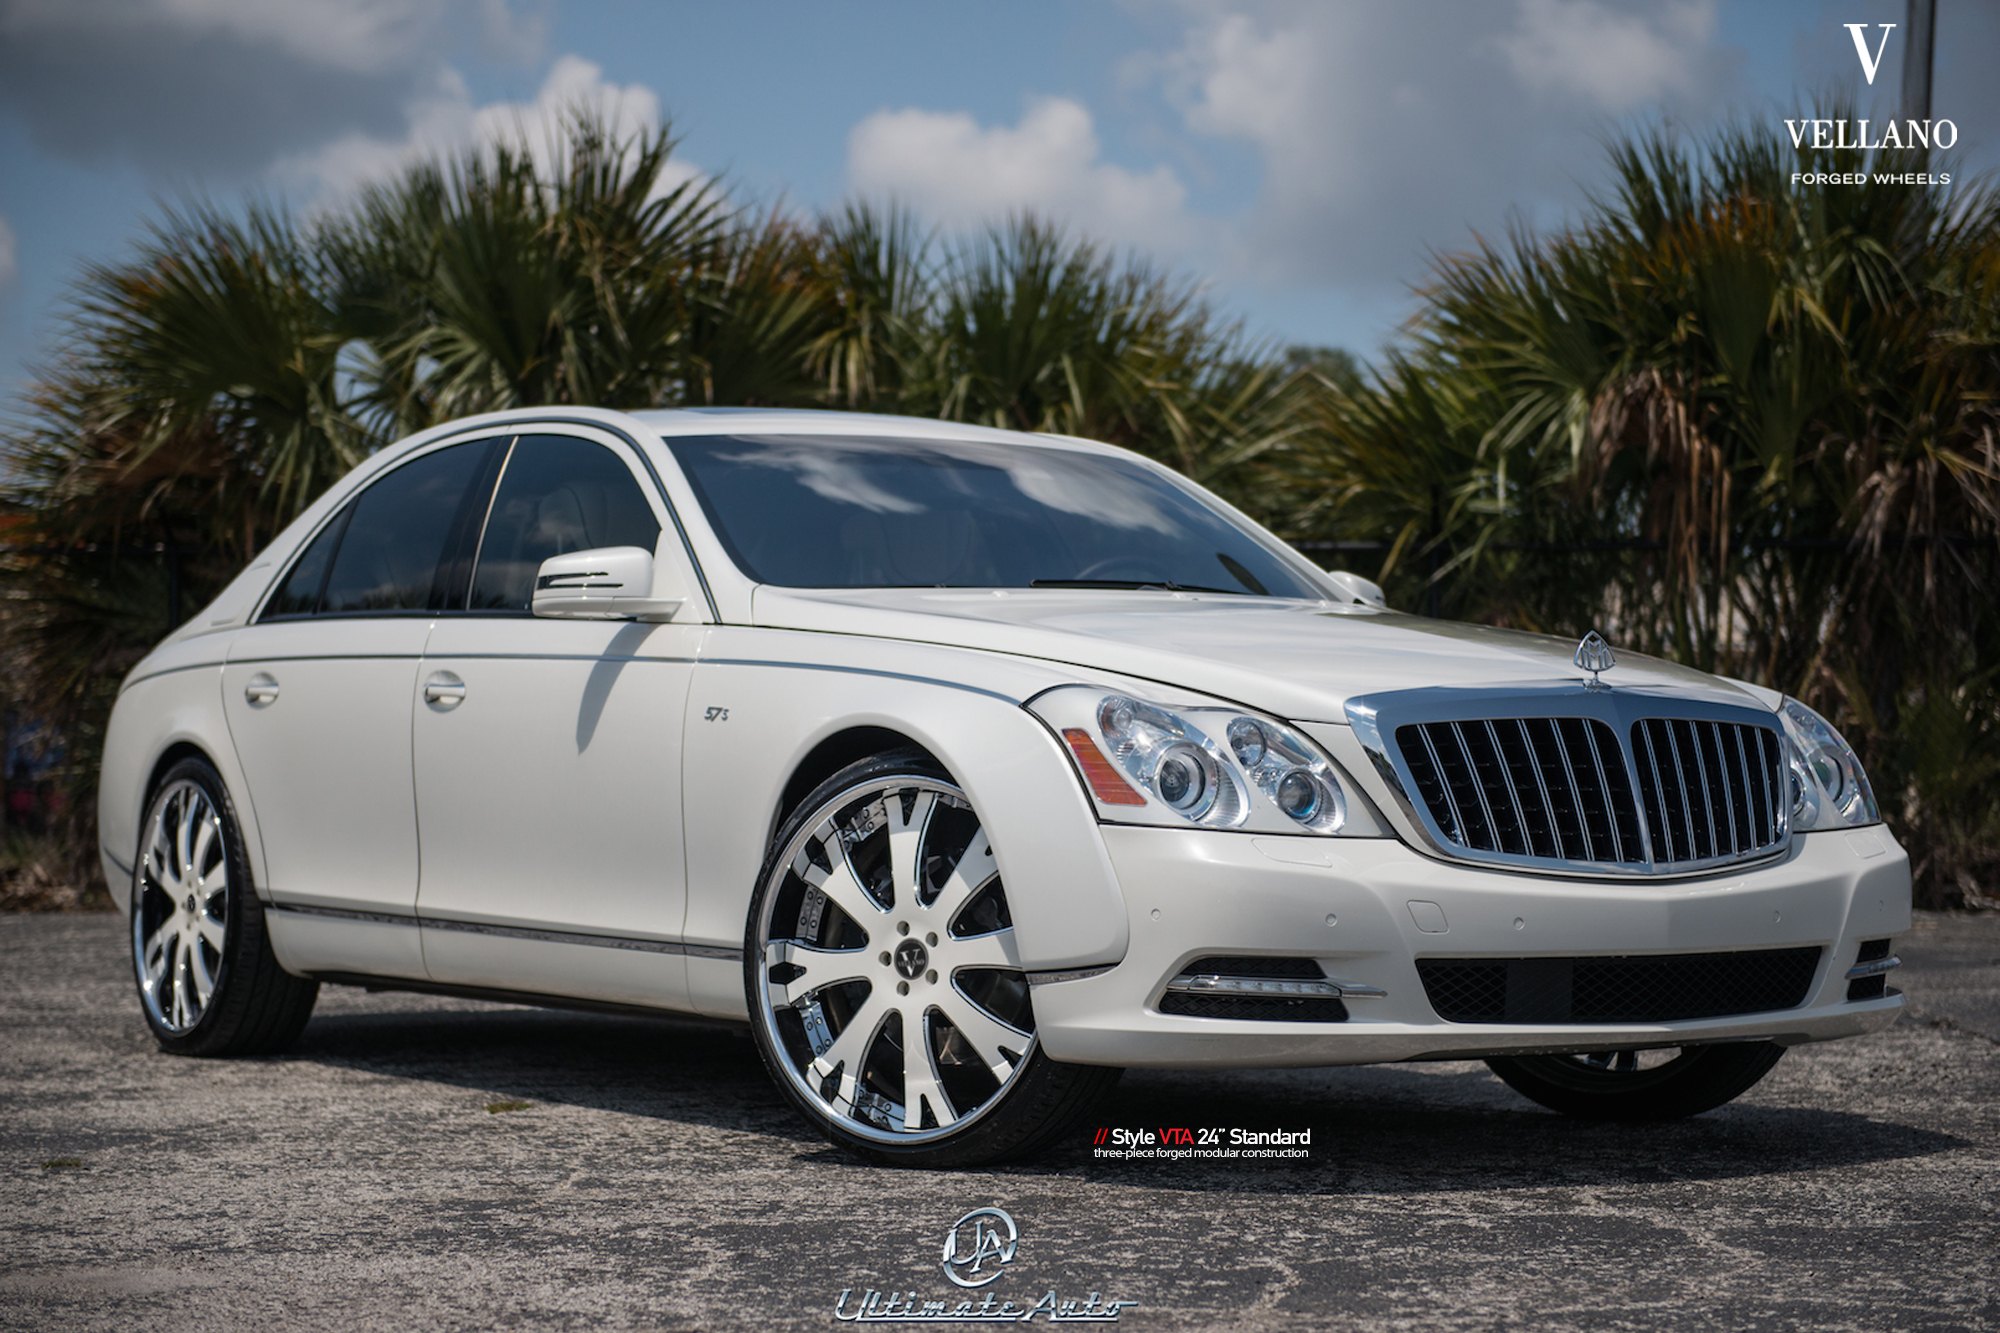 Chrome Billet Grille on White Maybach - Photo by Vellano